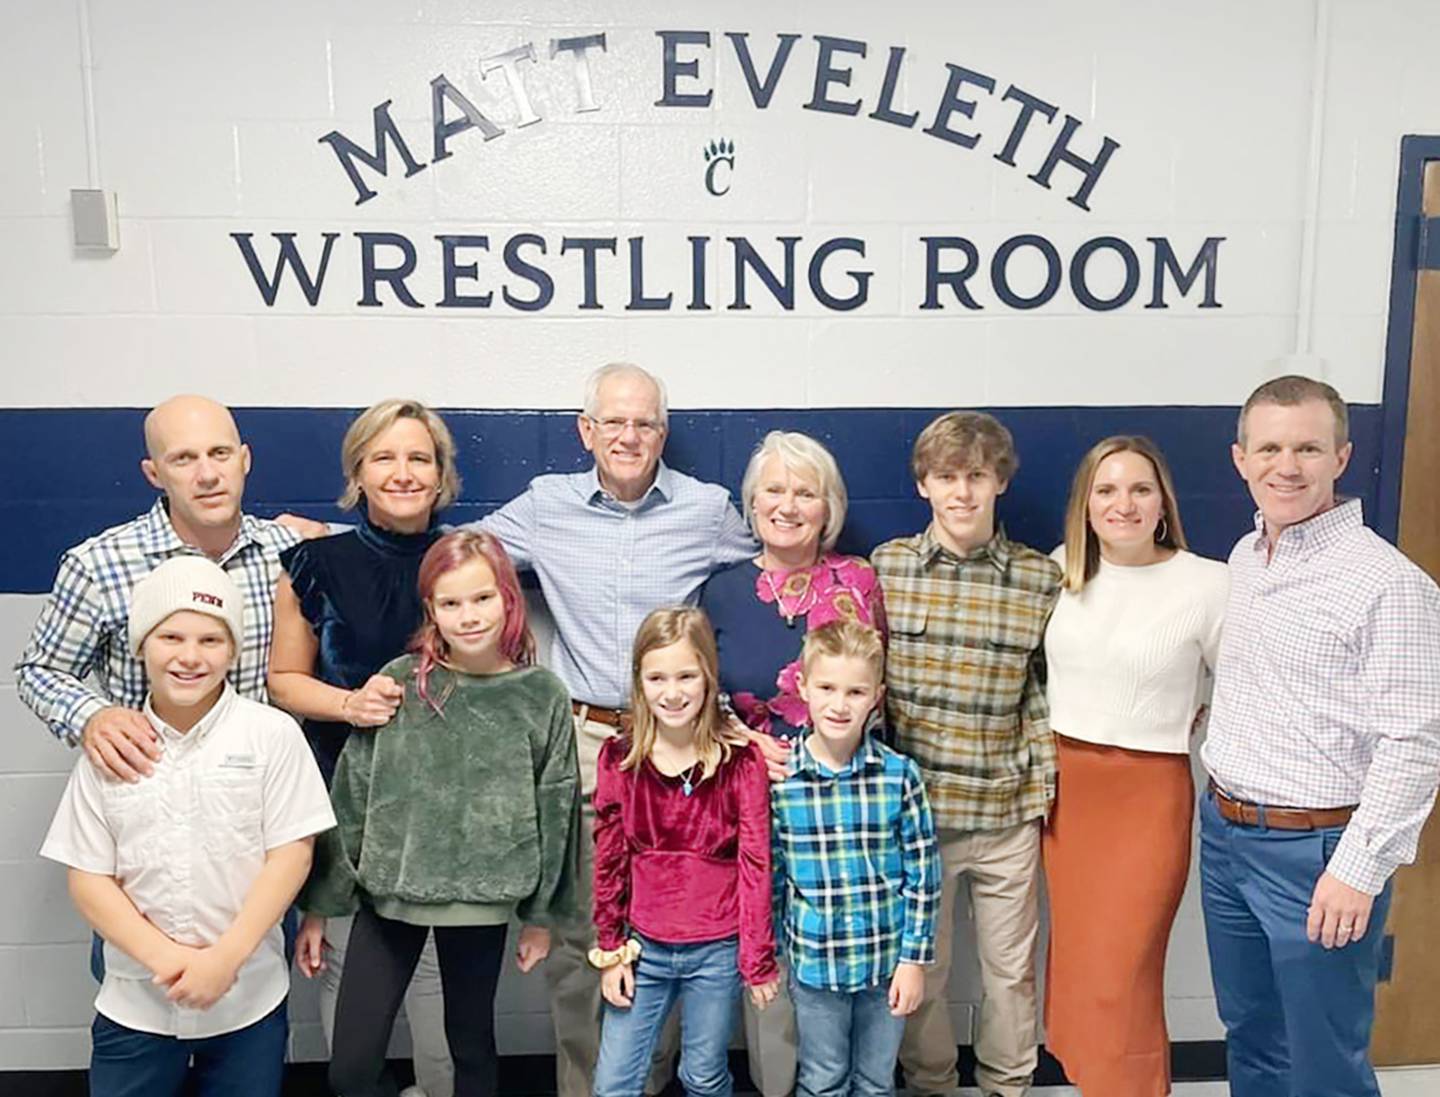 The family of Matt Eveleth at the dedication of the Matt Eveleth Wrestling Room at Chesapeake-AA High School. (Back row from left) Matt's eldest brother, Brian Jr., wife, Amy, father, Brian Sr., mother, Naomi, nephew, Toby, sister-in-law, Asahi, brother, Jeff. (Front row from left) Matt Eveleth's nieces and nephews Drew, Natalie, Molly and Charlie.